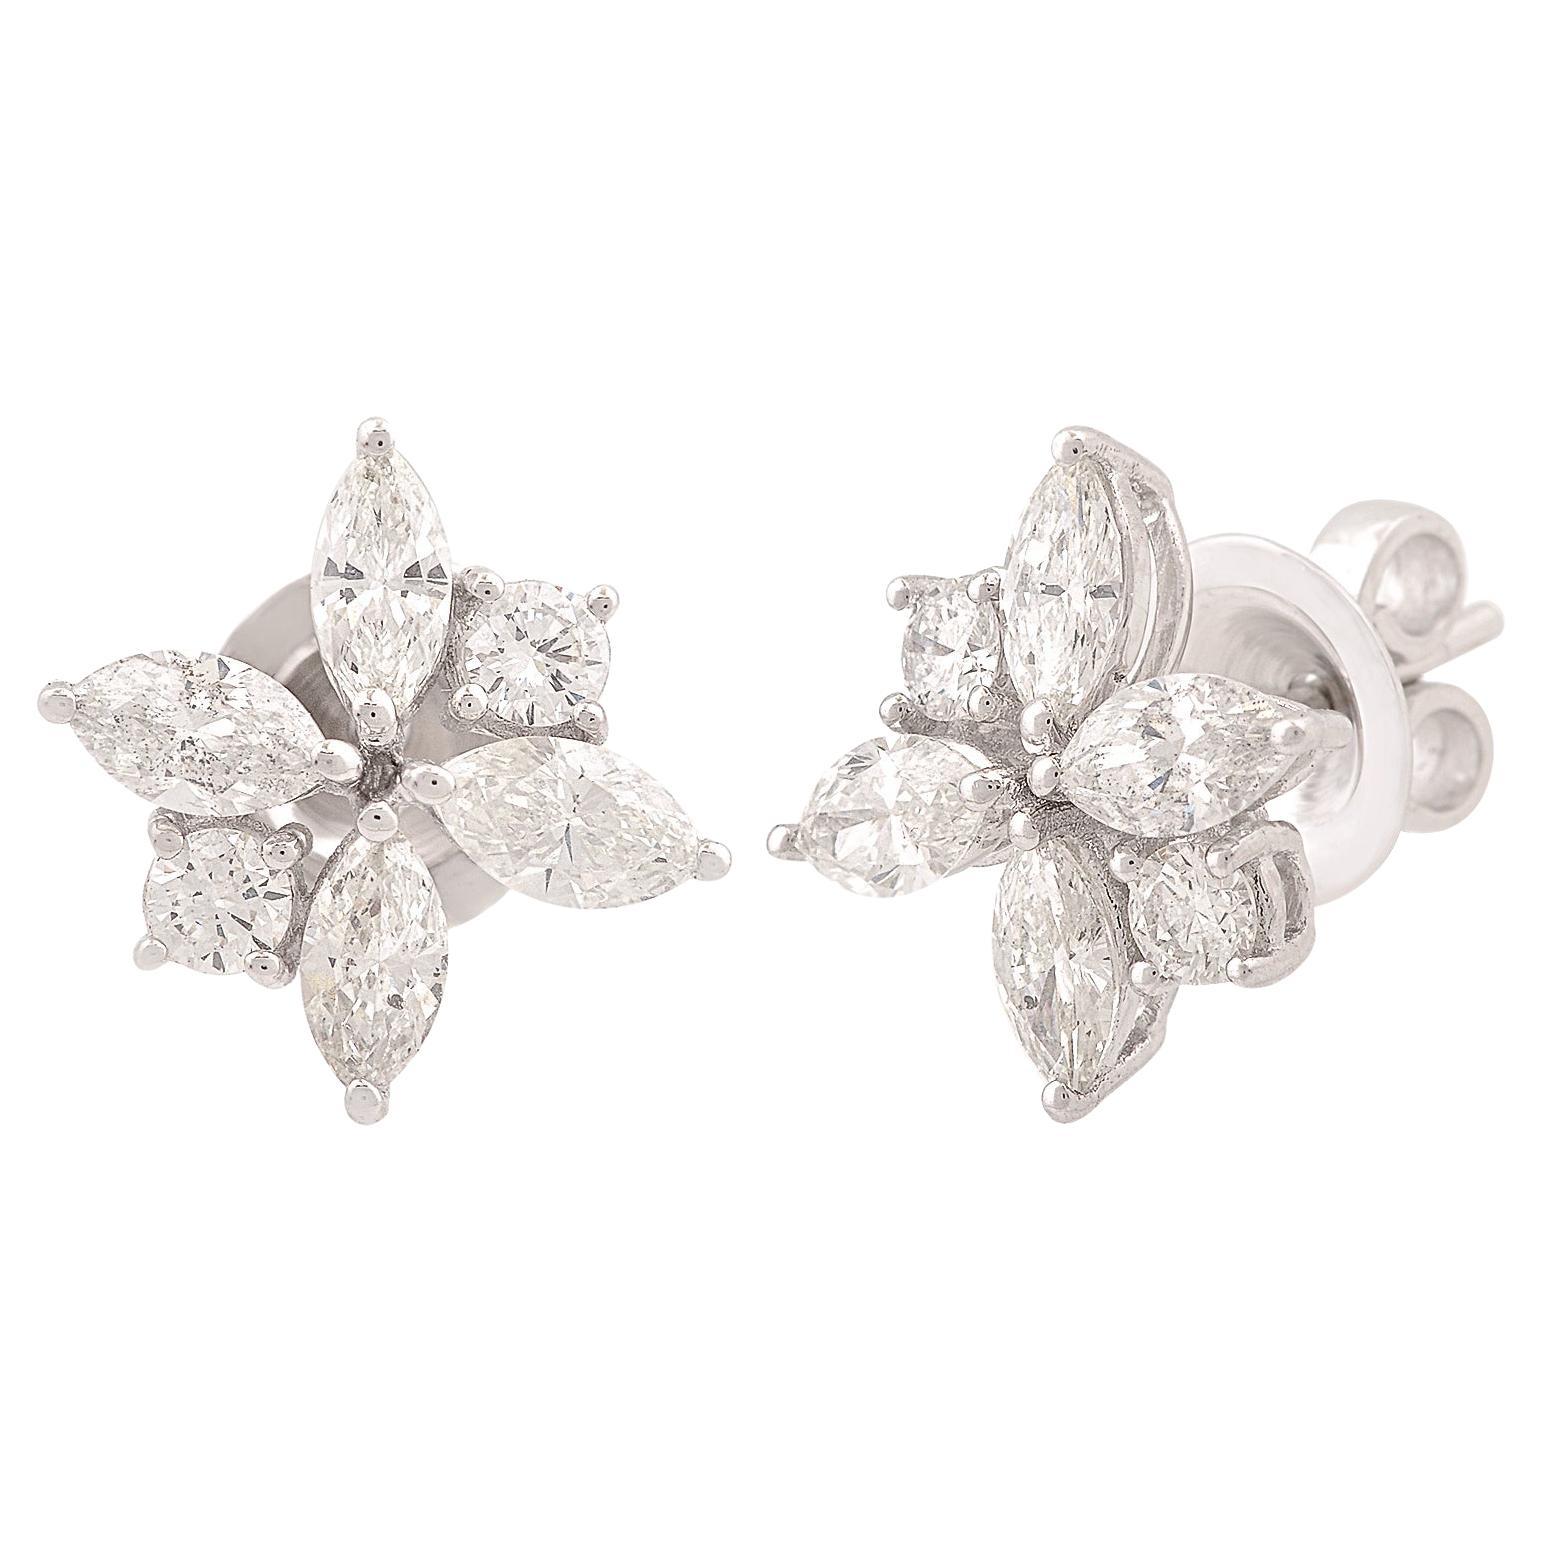 1.57 Carat Marquise & Round Diamond Stud Earrings 18 Karat White Gold Jewelry For Sale